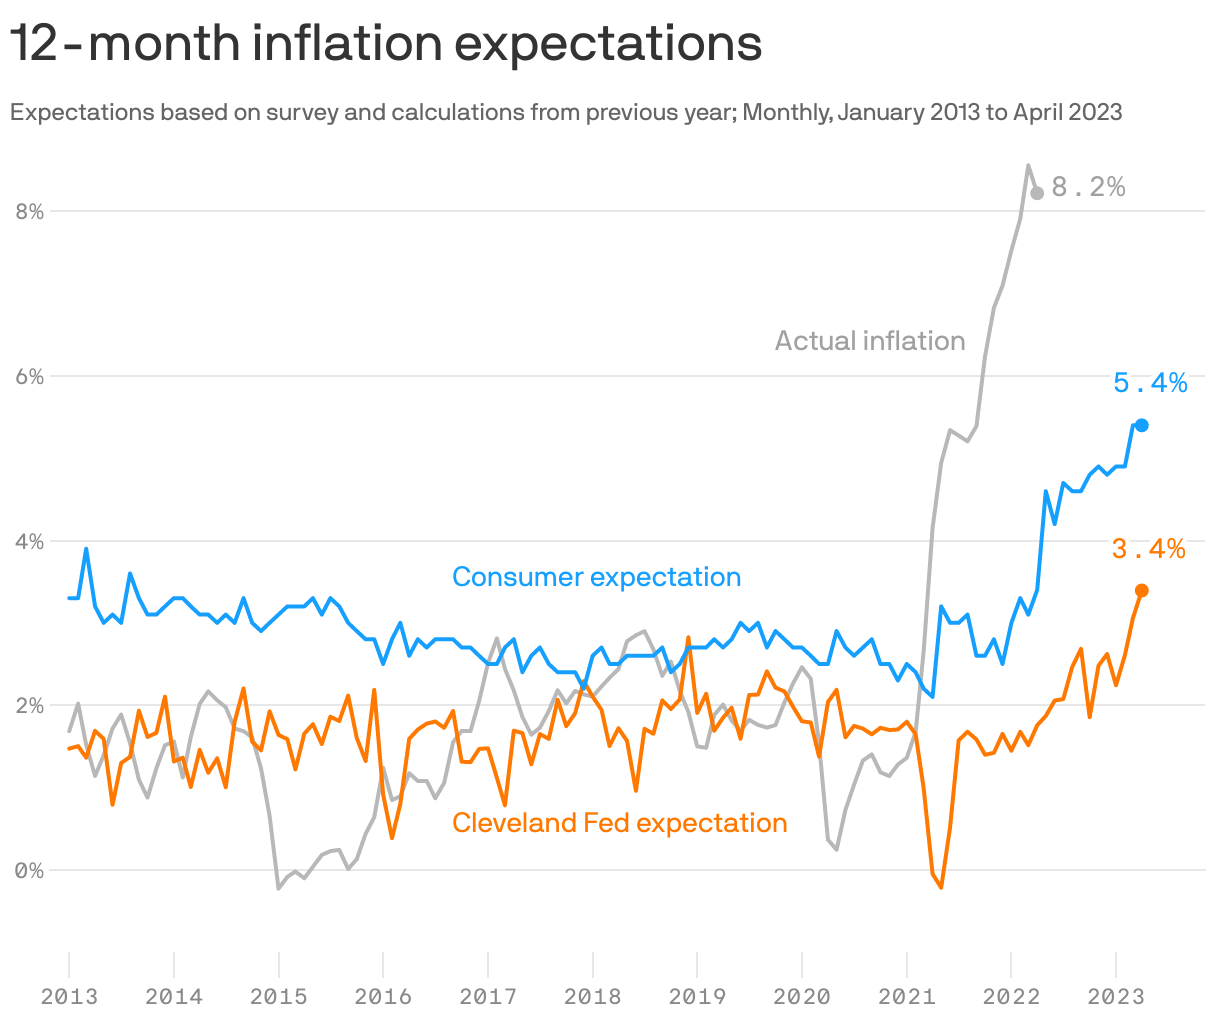 12-month inflation expectations